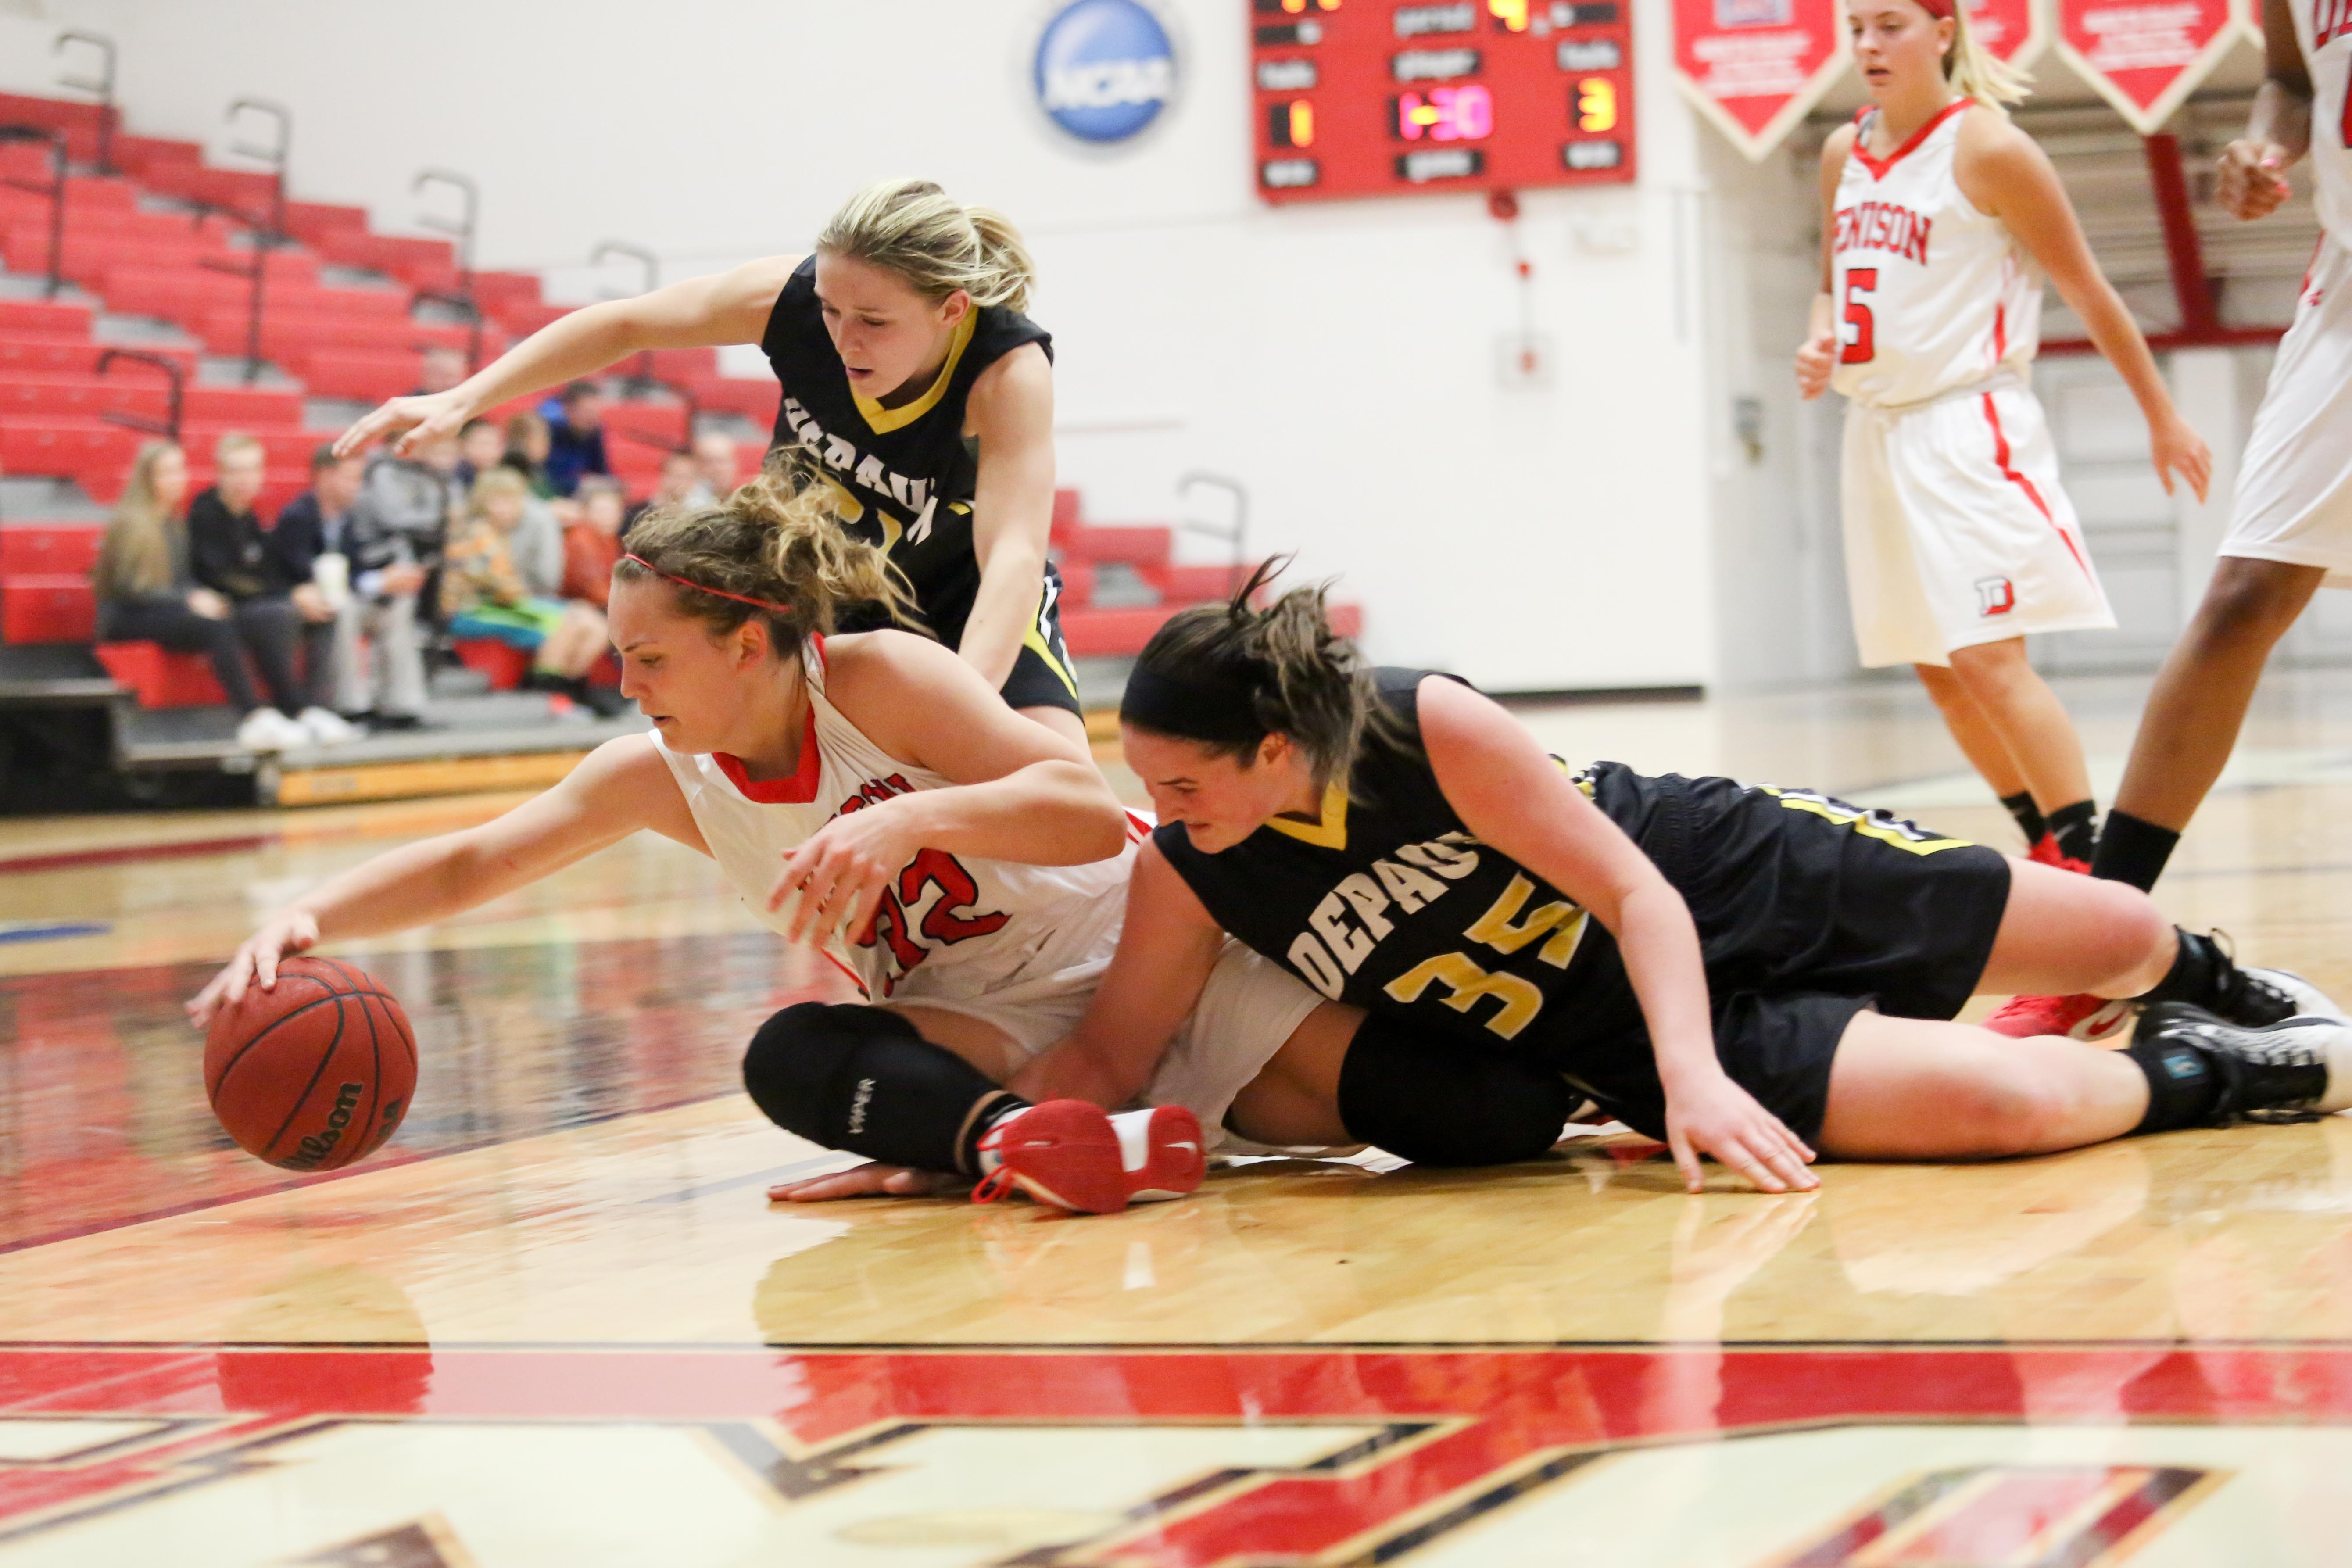 Claire Ryan (left), Lauren Hofer (center), and Melinda Franke (right) dive after a loose ball. DePauw continued its 12-game winning streak topping Denison 63-50 in double overtime. SAM CARAVANA / THE DEPAUW